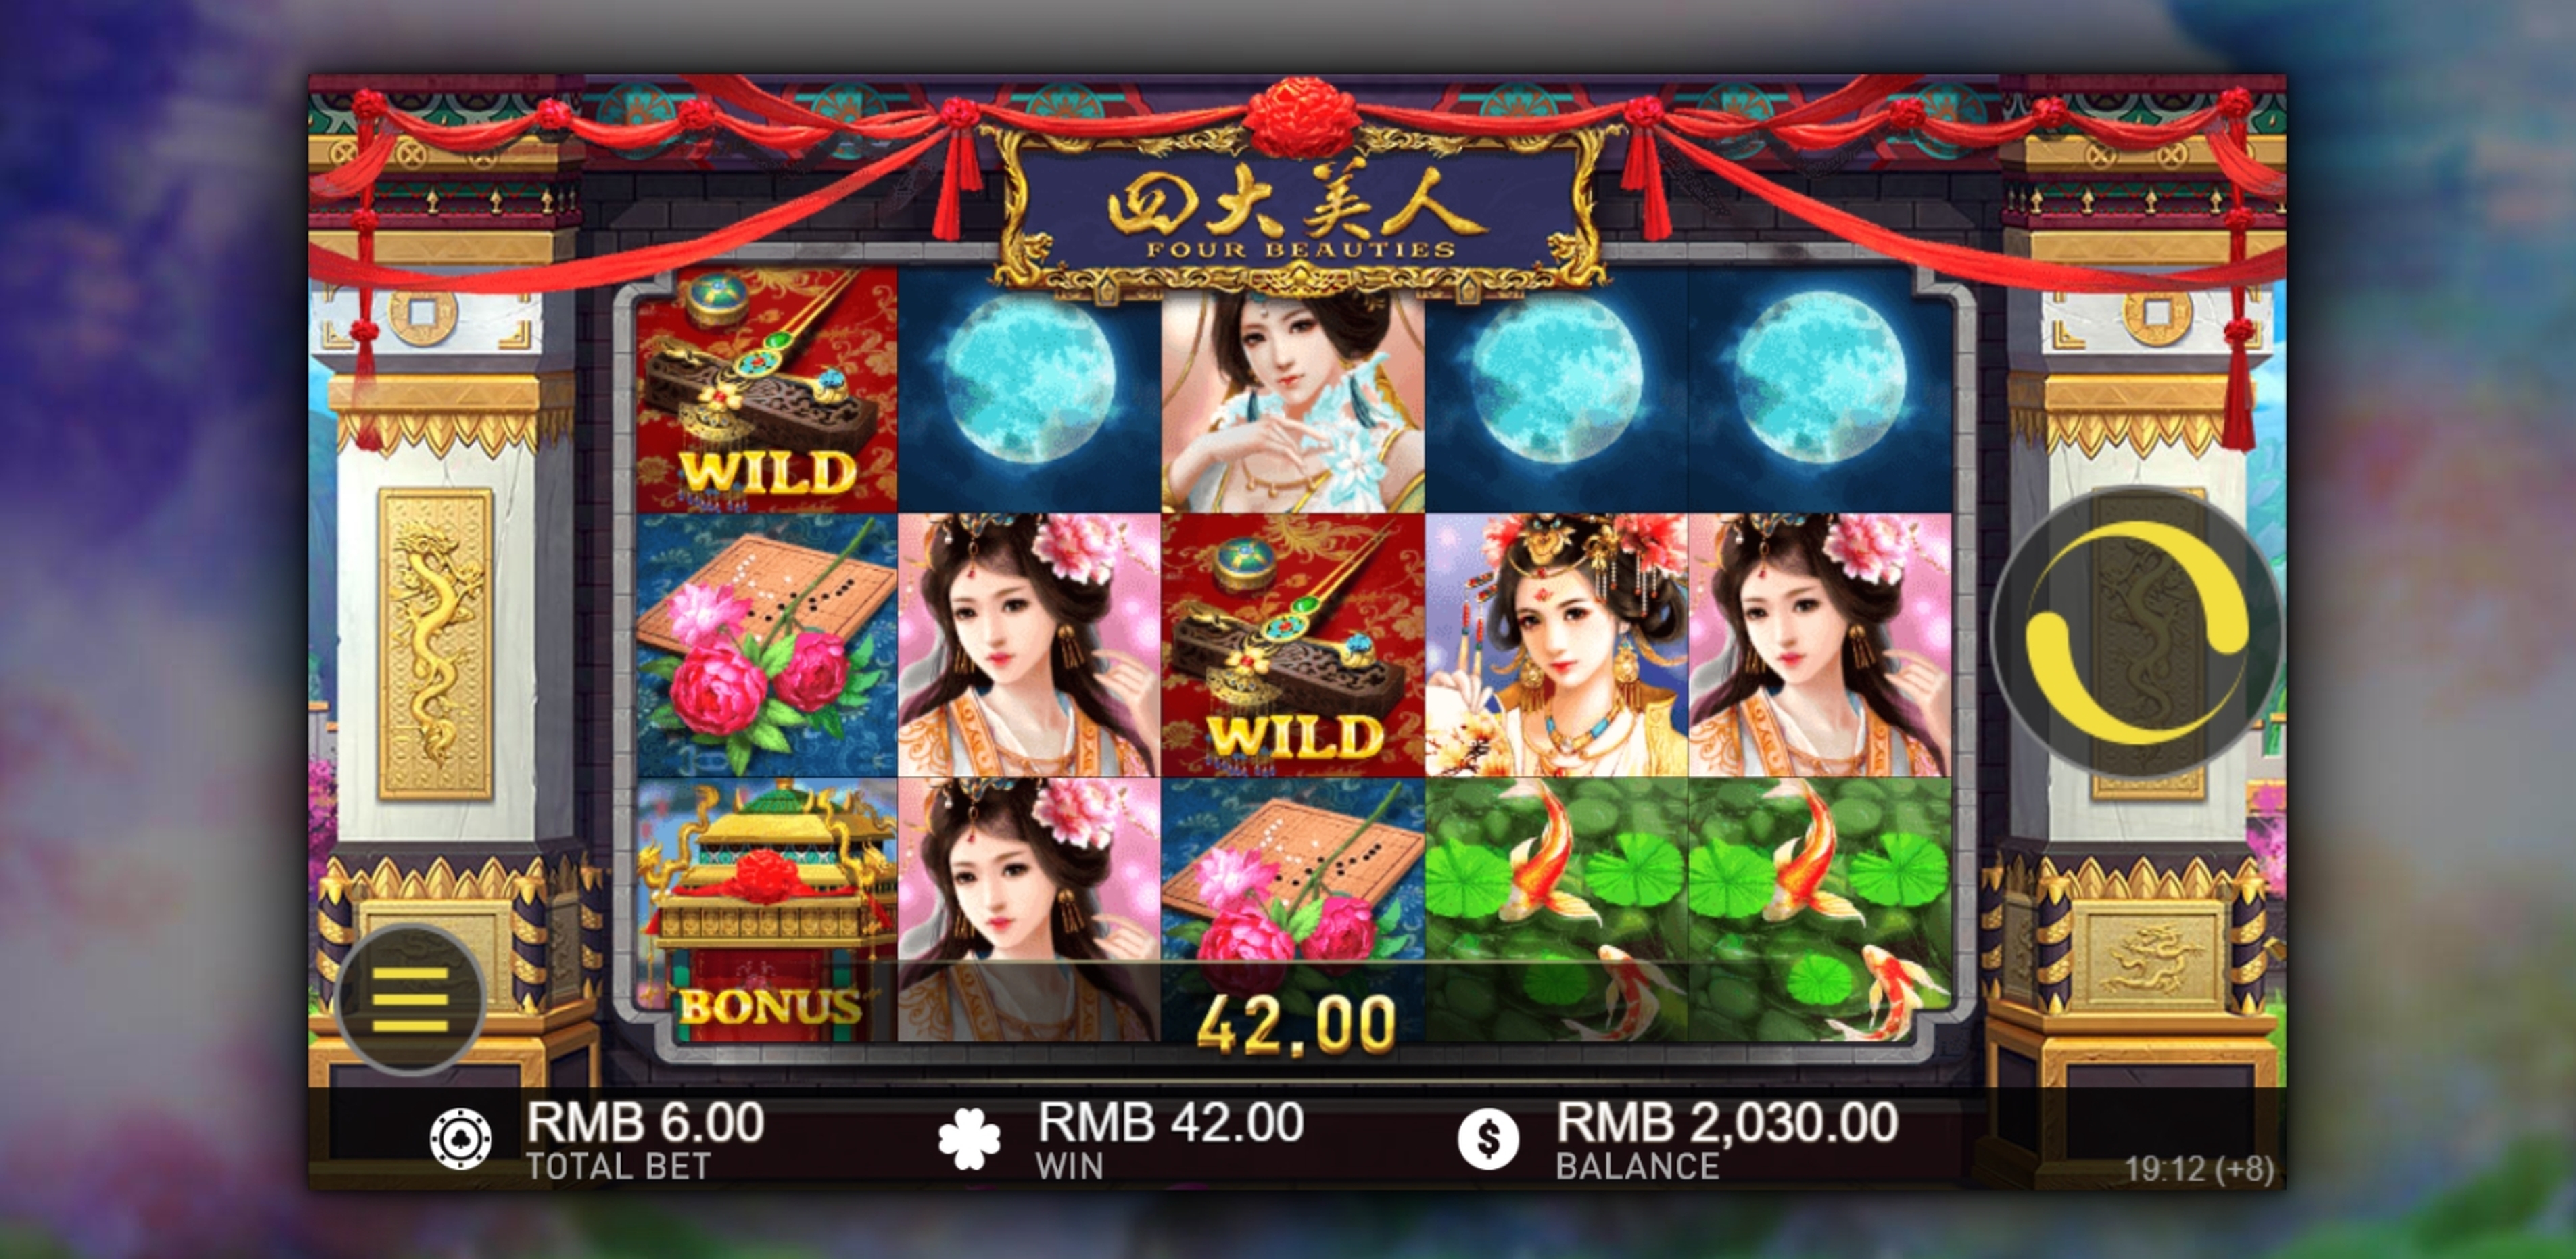 Win Money in Four Beauties Free Slot Game by Gameplay Interactive